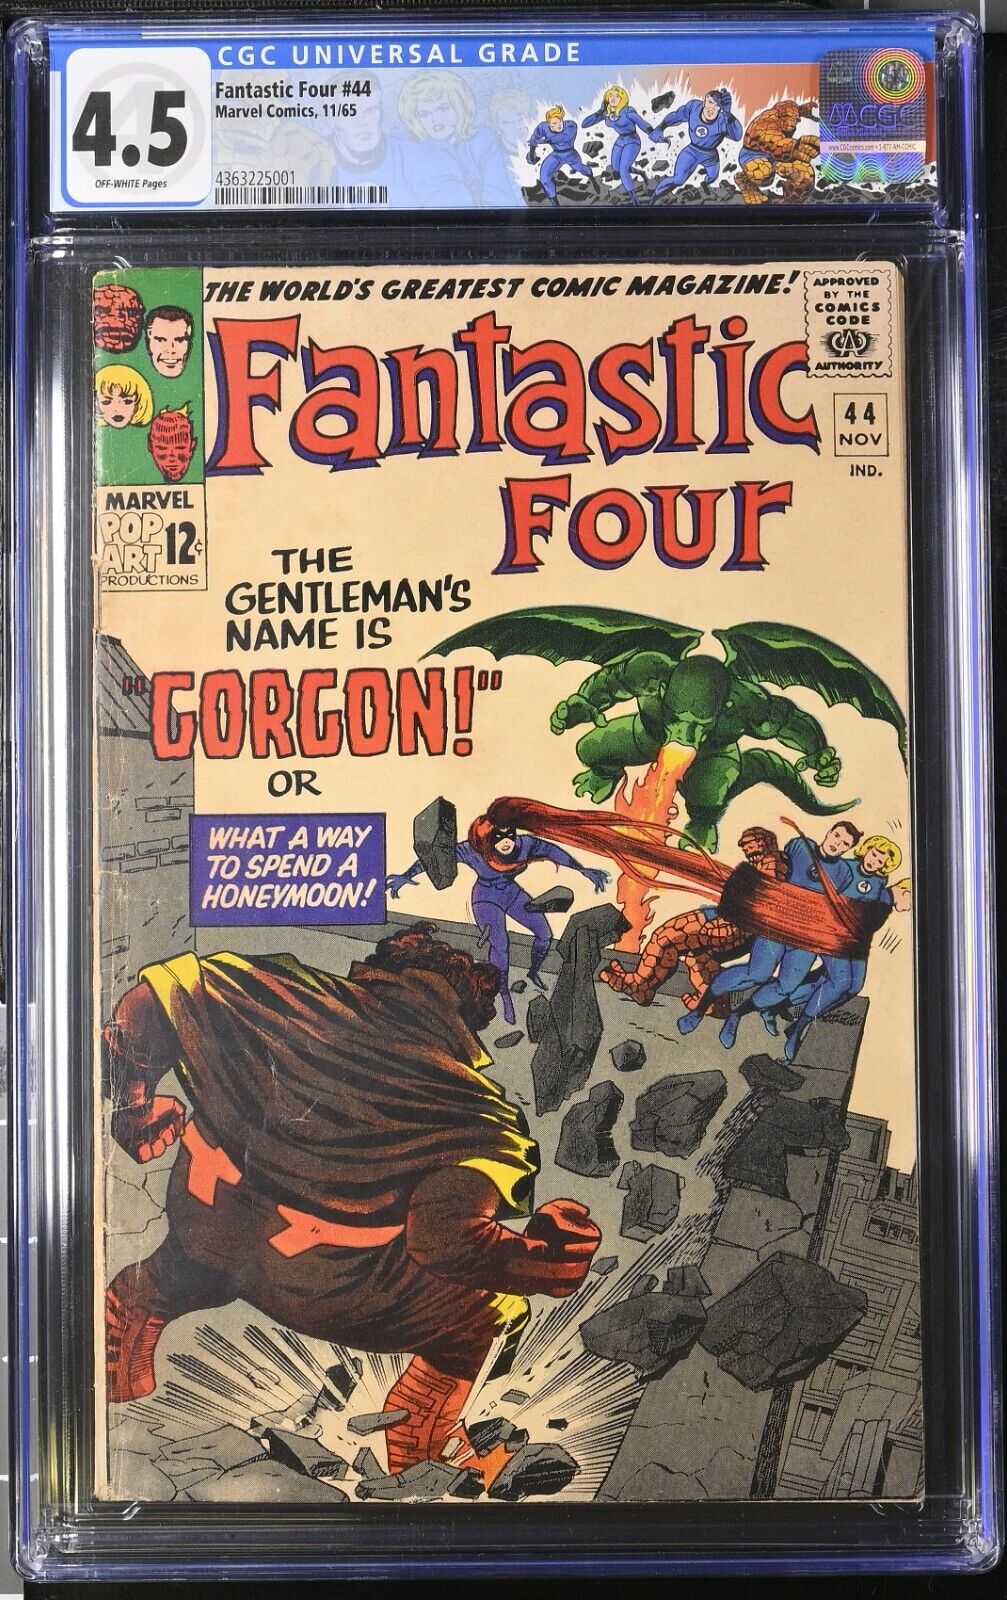 FANTASTIC FOUR #44 (1965) CGC 4.5 OW FIRST APPEARANCE OF GORGON MARVEL COMICS